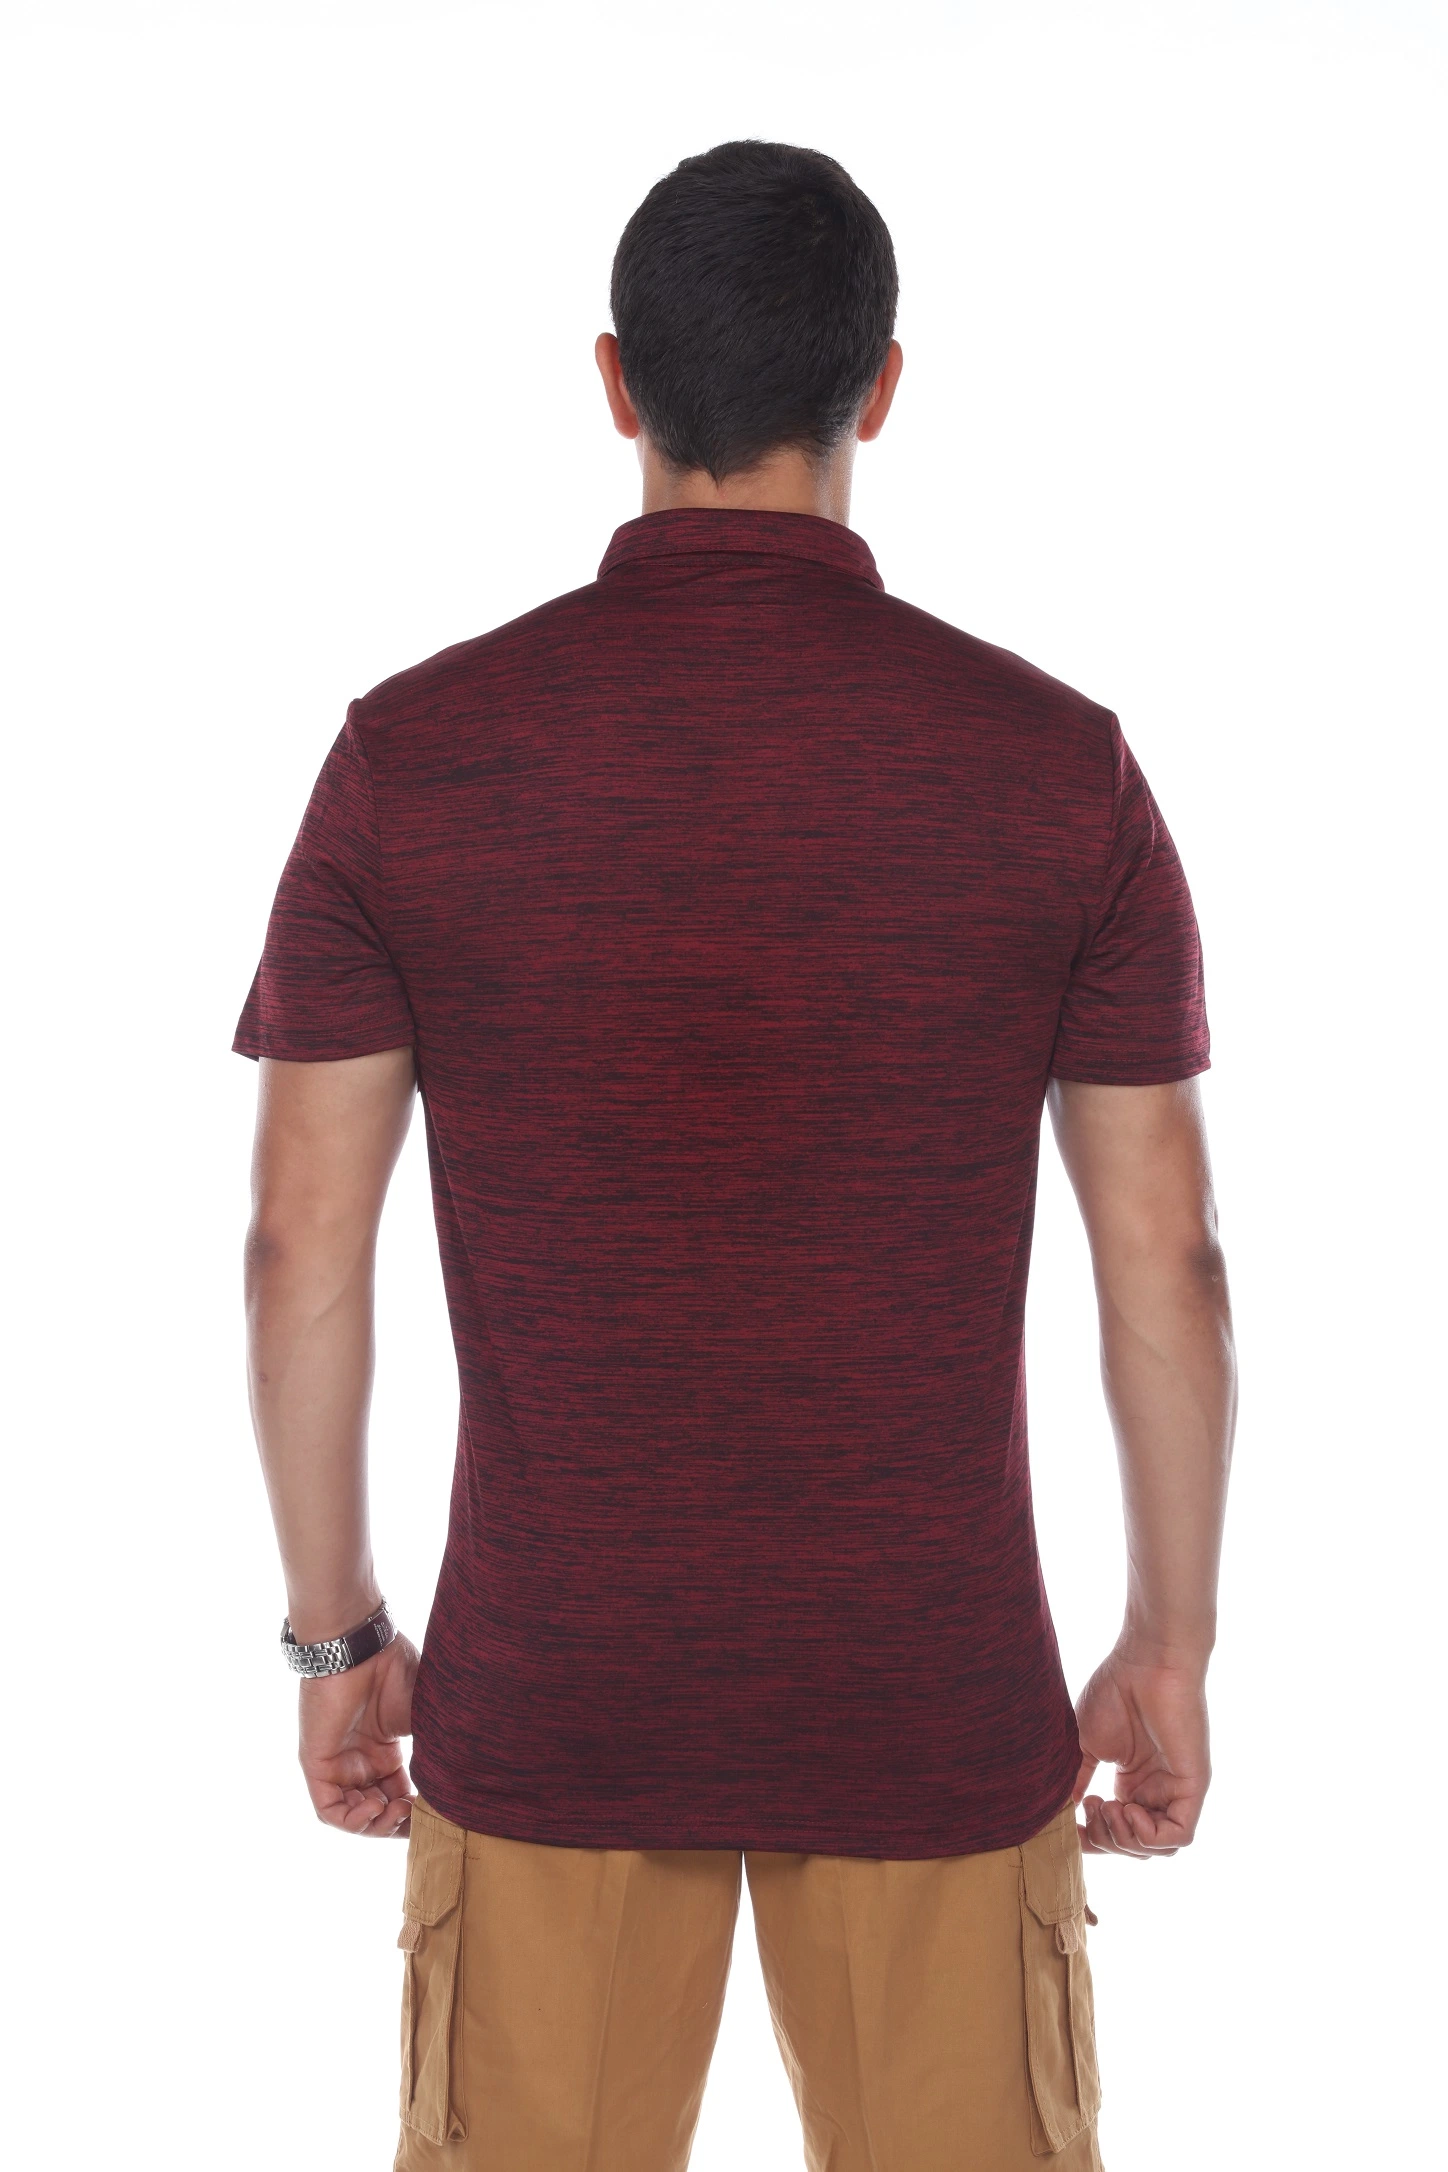 Mens Polo Shirt with Marled Jersey Simple Fashion Sportswear Style